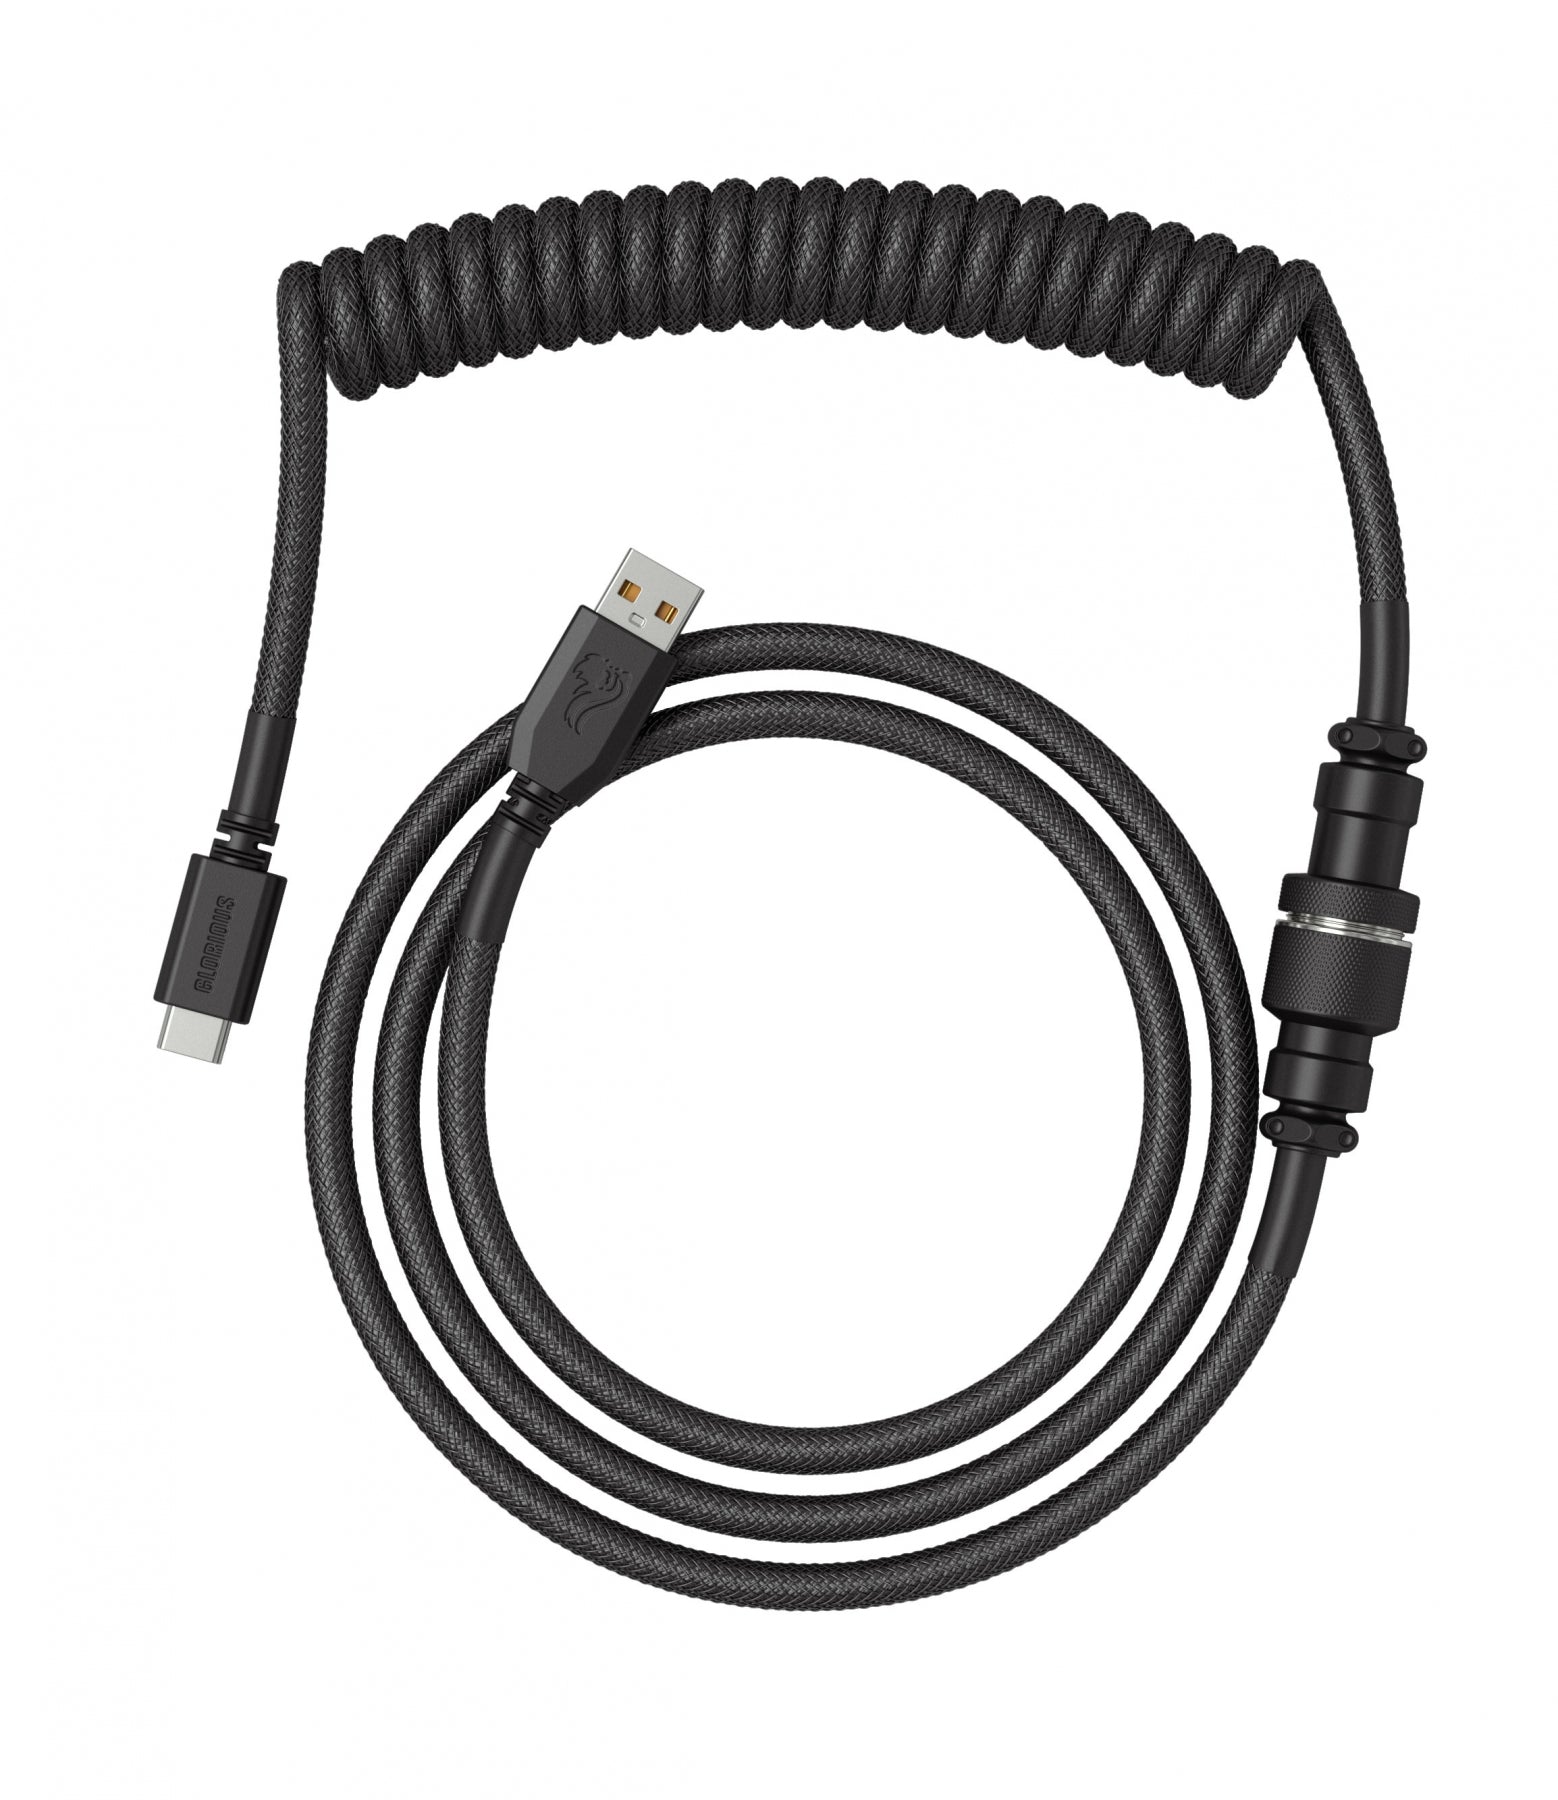 Glorious PC Coiled Keyboard Cable Black MKS9X20AL8 |0|